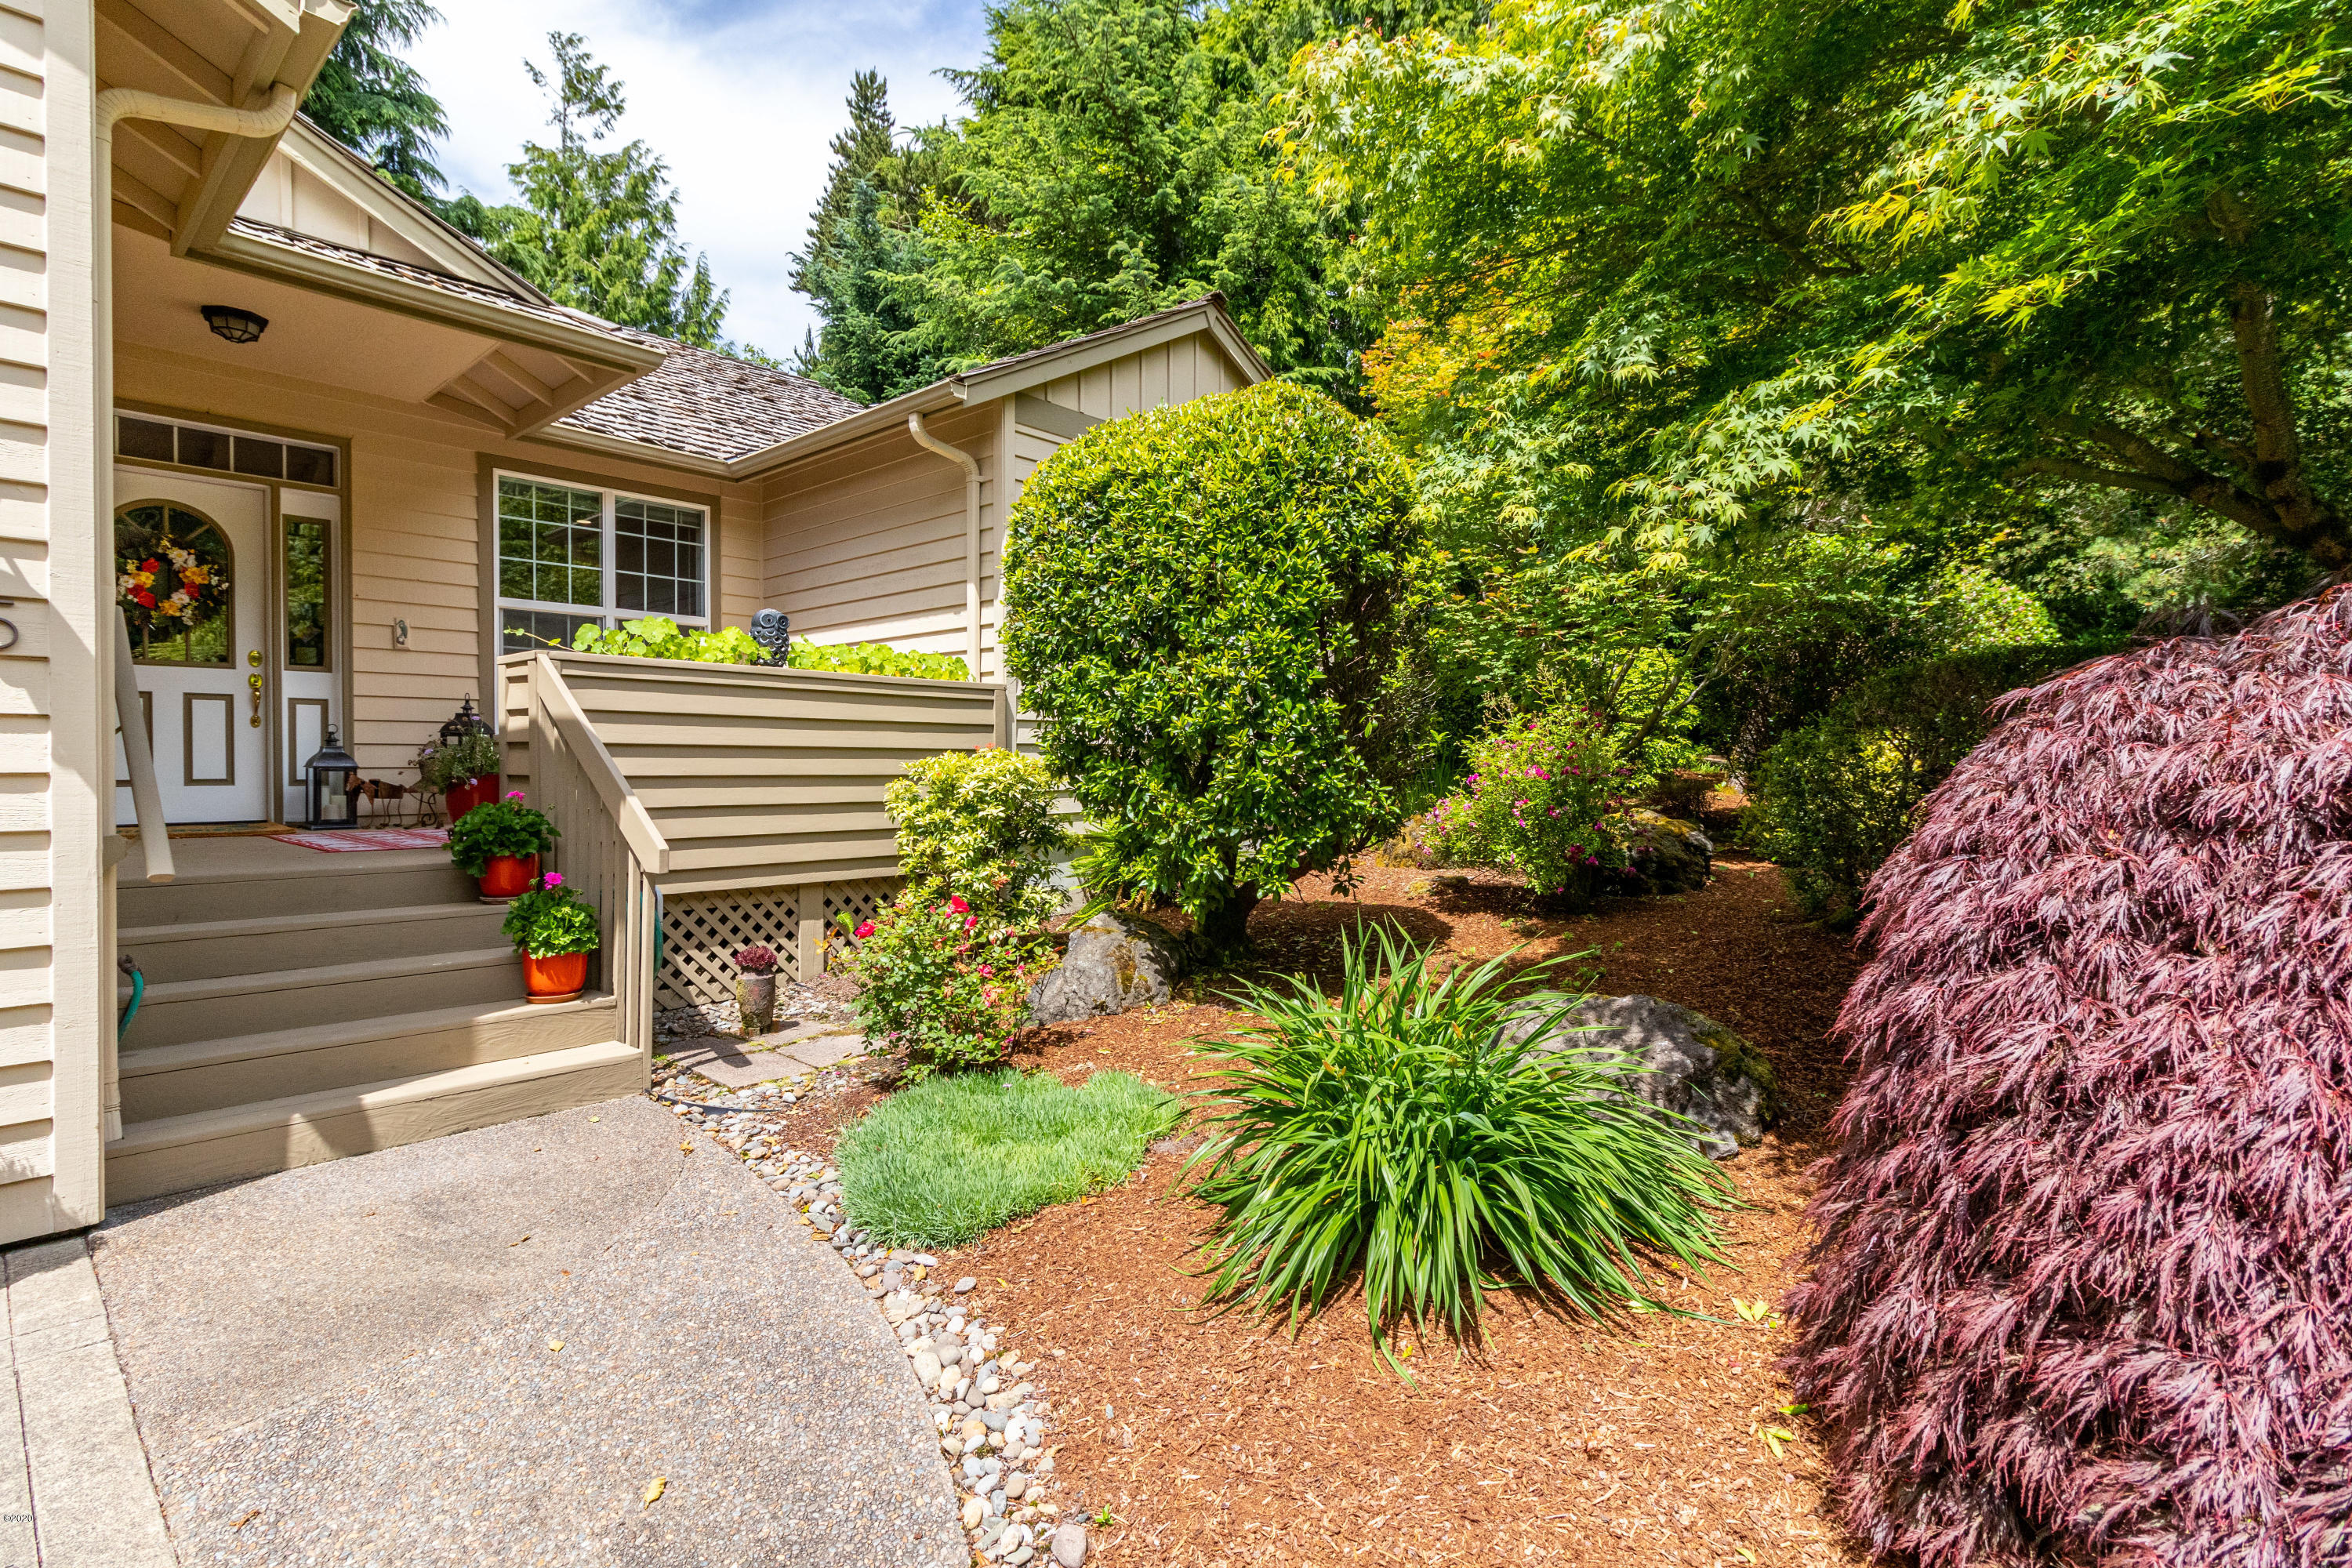 145 SW Cormorant Depoe Bay, Gleneden Beach, Lincoln City, Newport, Otis, Rose Lodge, Seal Rock, Waldport, Yachats, To Home Listings - Amy Plechaty, Emerald Coast Realty Real Estate, homes for sale, property for sale